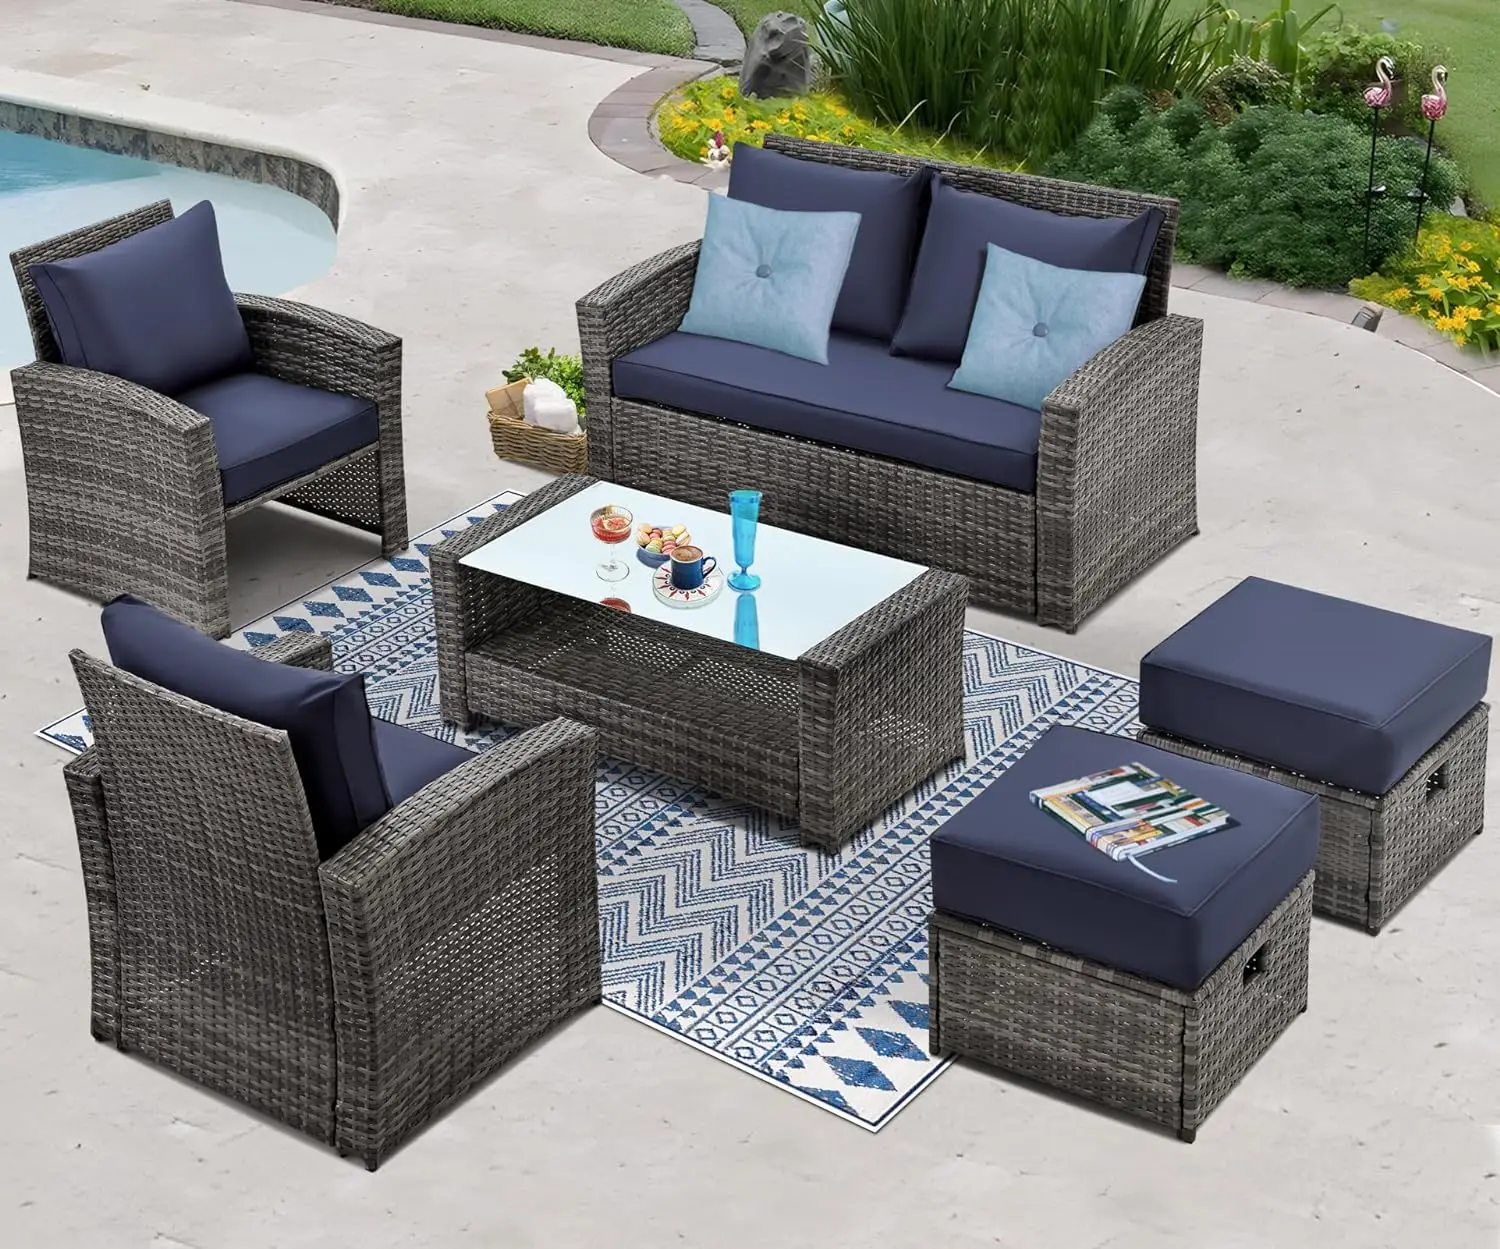 

6-Piece Patio Furniture Set, Outdoor Wicker Conversation Sets, Rattan Sectional Sofa w/Coffee Table, Cushions& 2 Ottoman